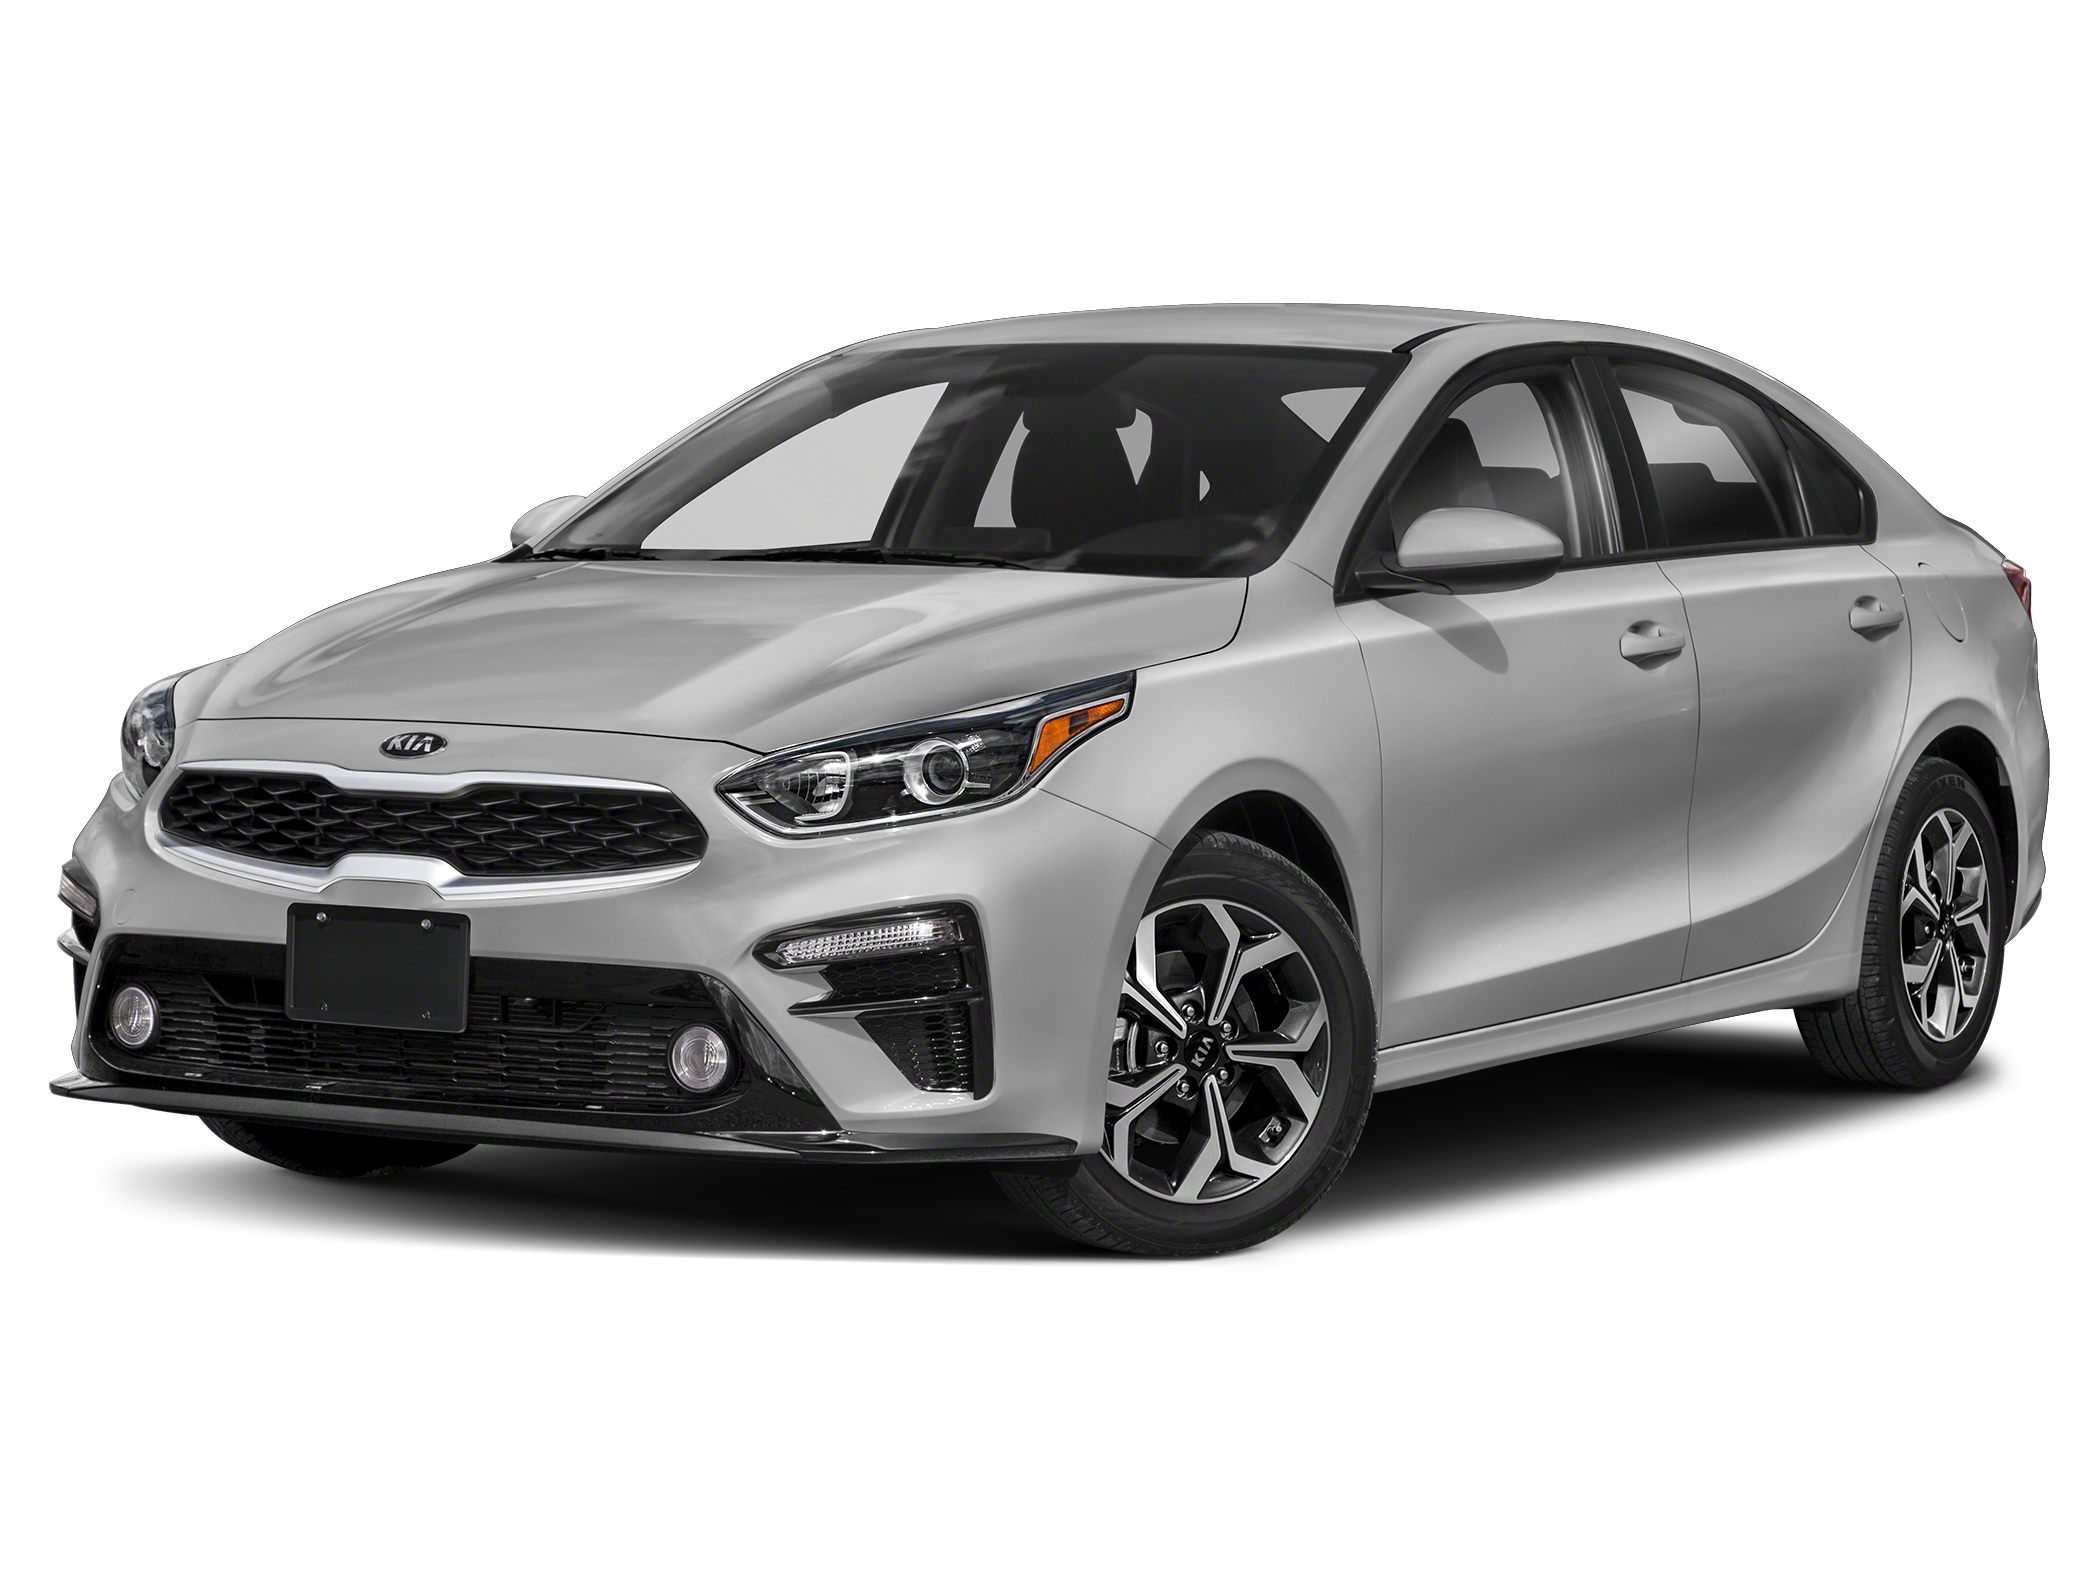 Used Kia Forte Silver For Sale Near Me: Check Photos And Prices | CarBuzz